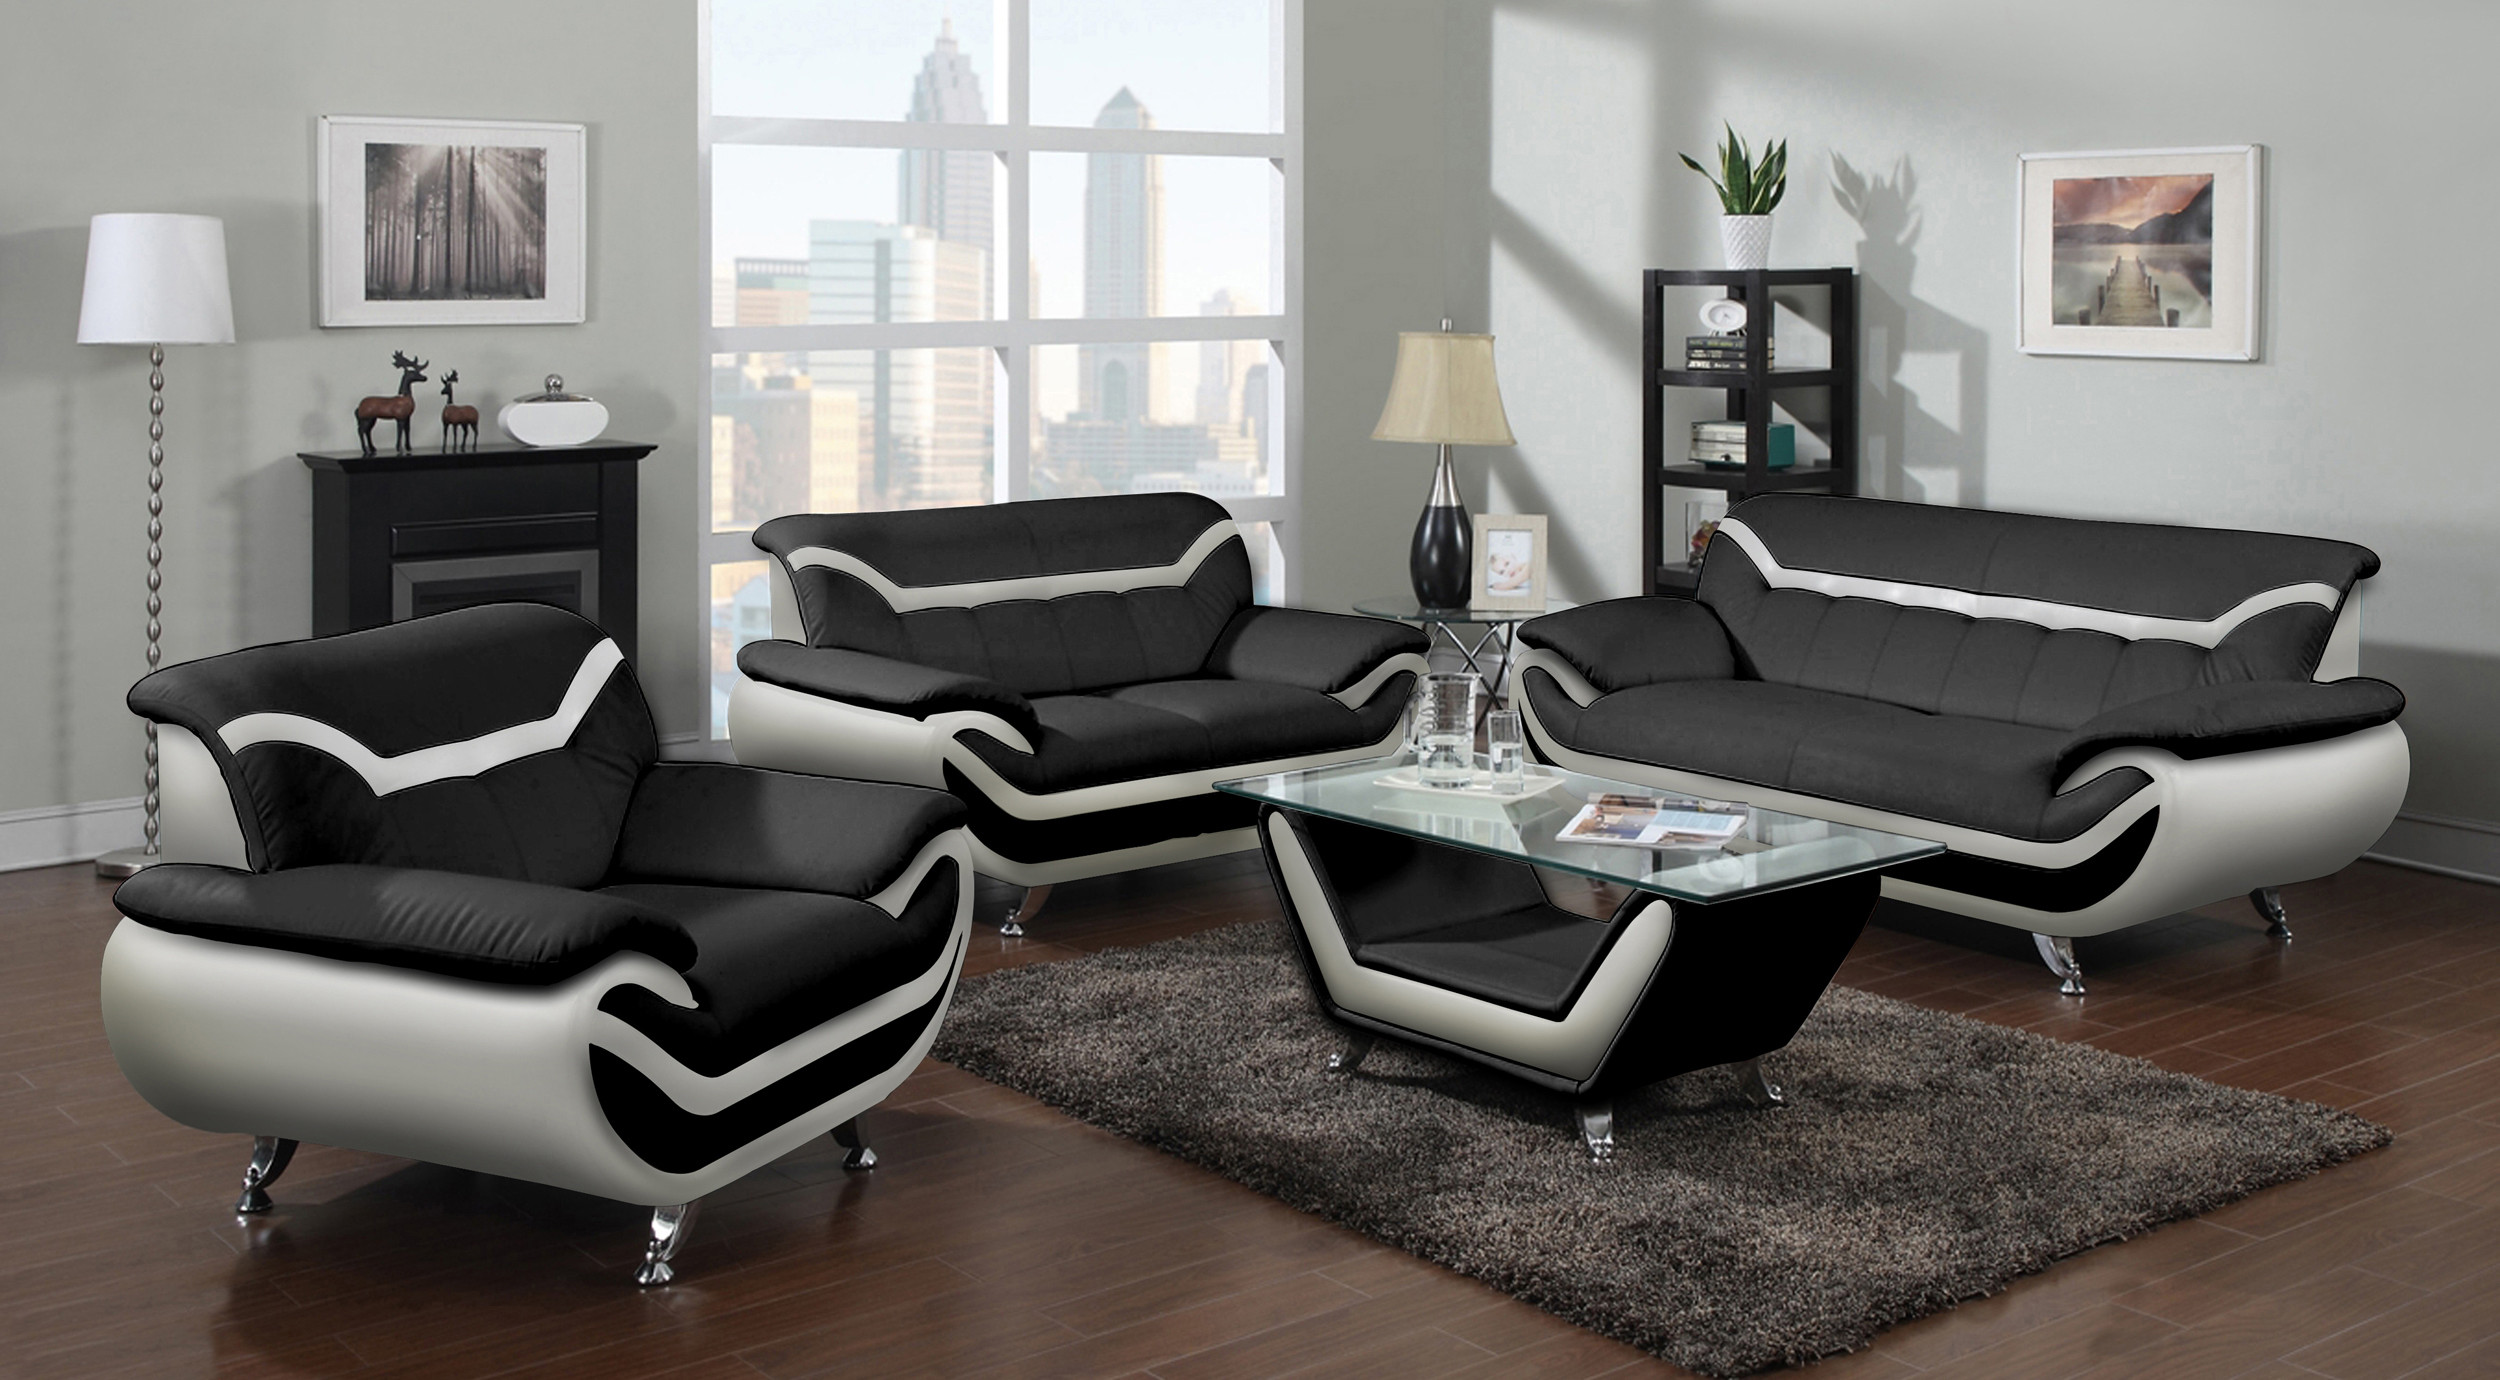 Modern Living Room Sets
 715L Black and White Leather Contemporary Living Room Set